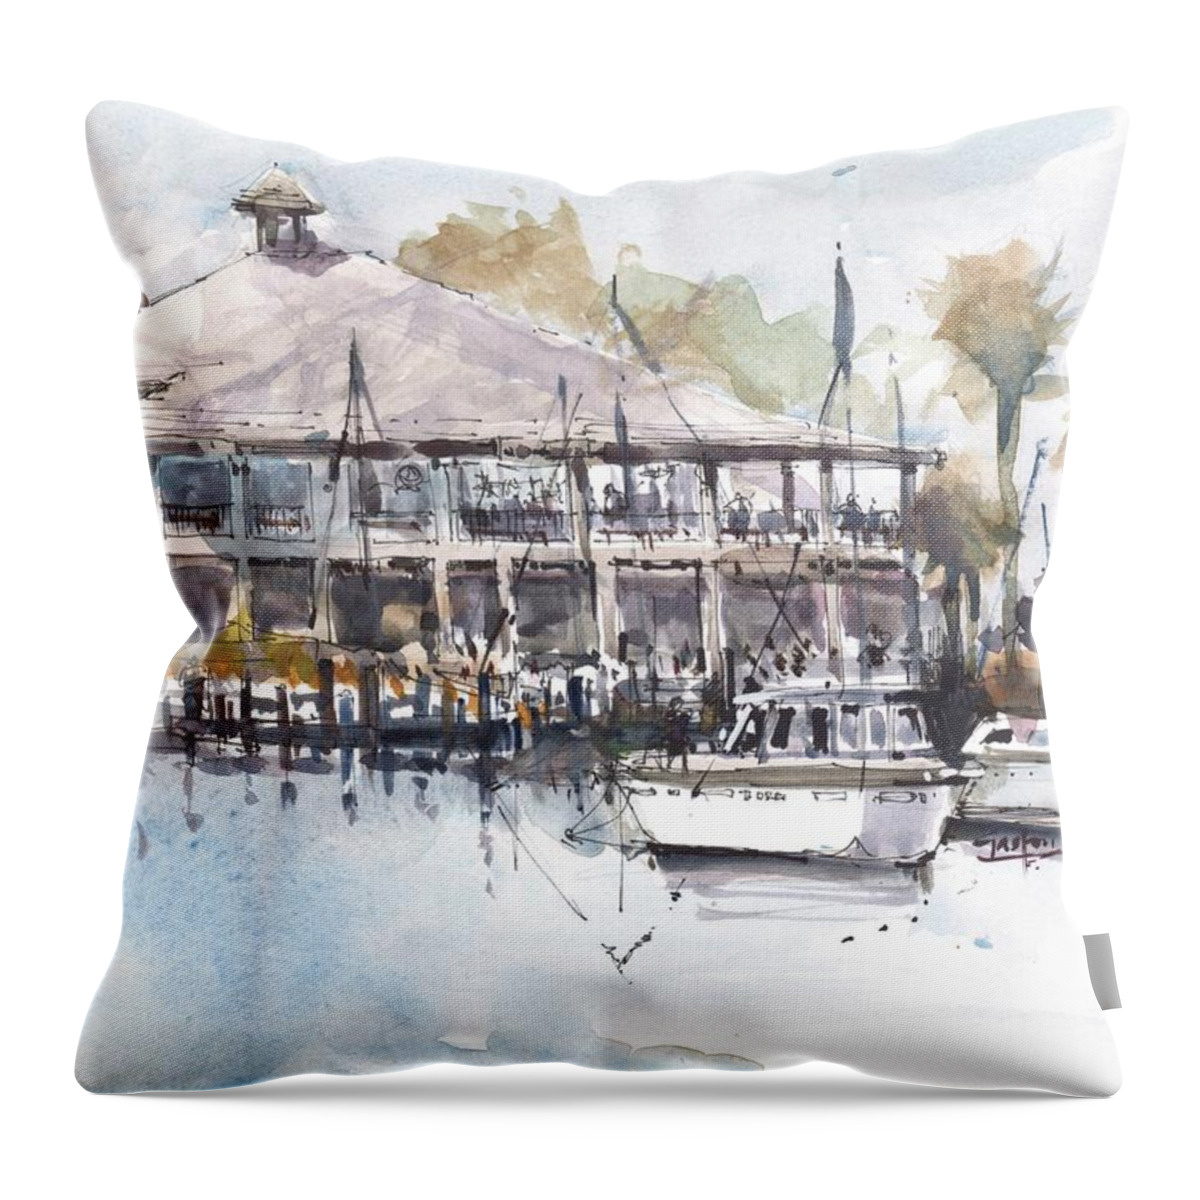  Throw Pillow featuring the painting Yacht Club Sketch by Gaston McKenzie